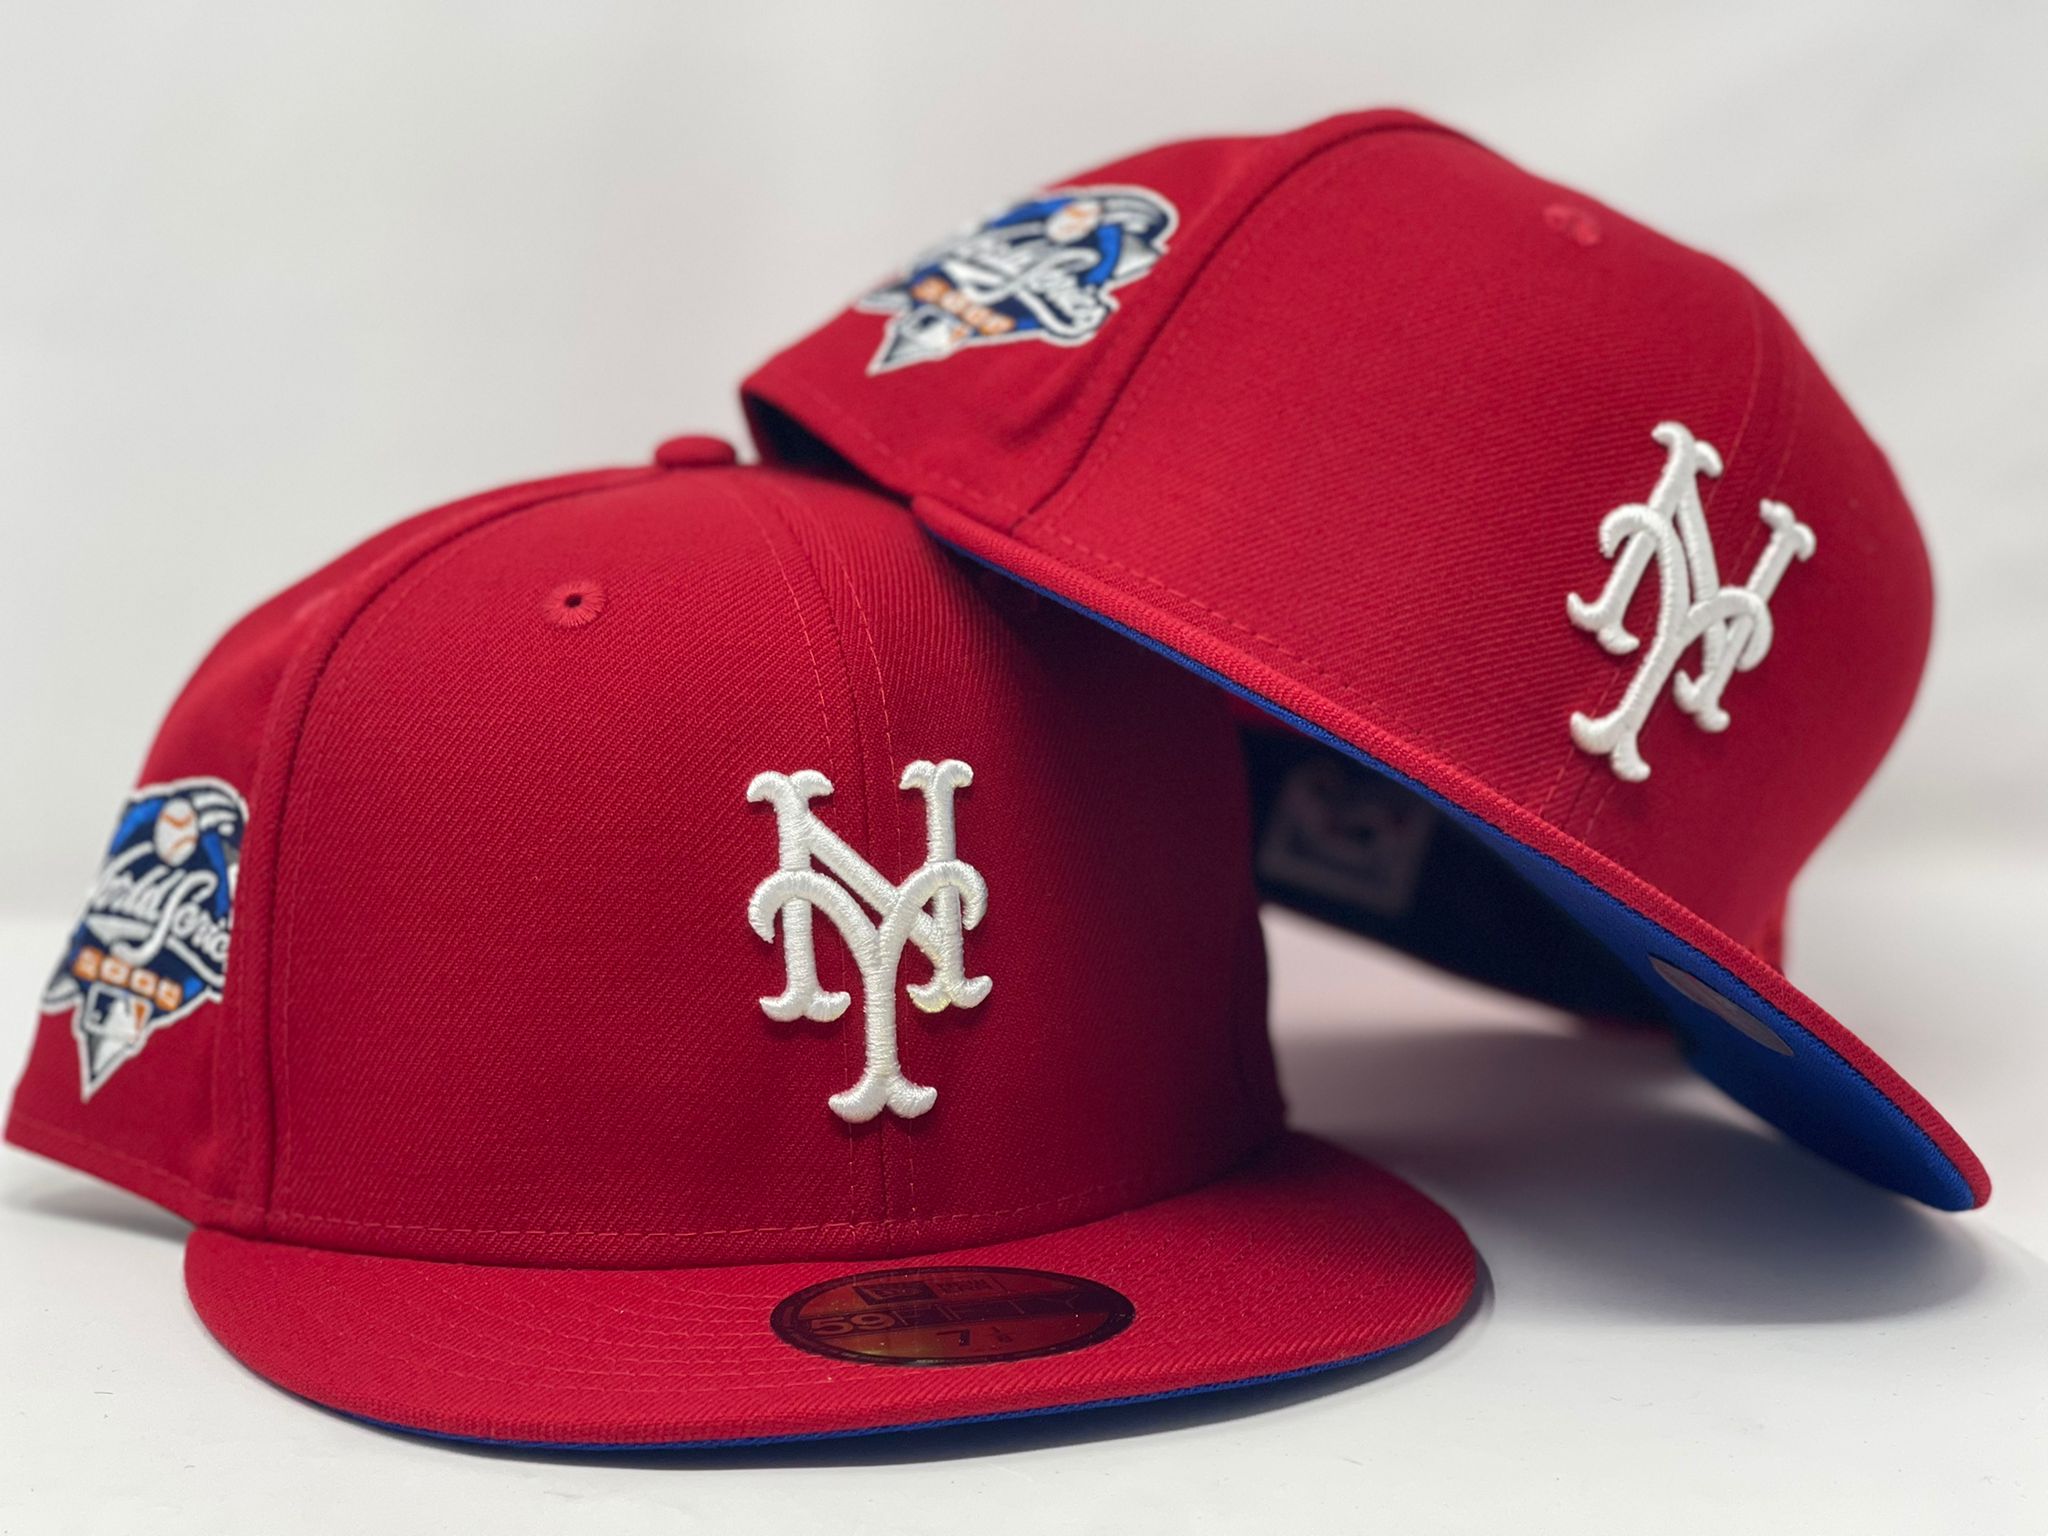 New Era New York Mets World Series 2000 Red Edition 59FIFTY Fitted Cap